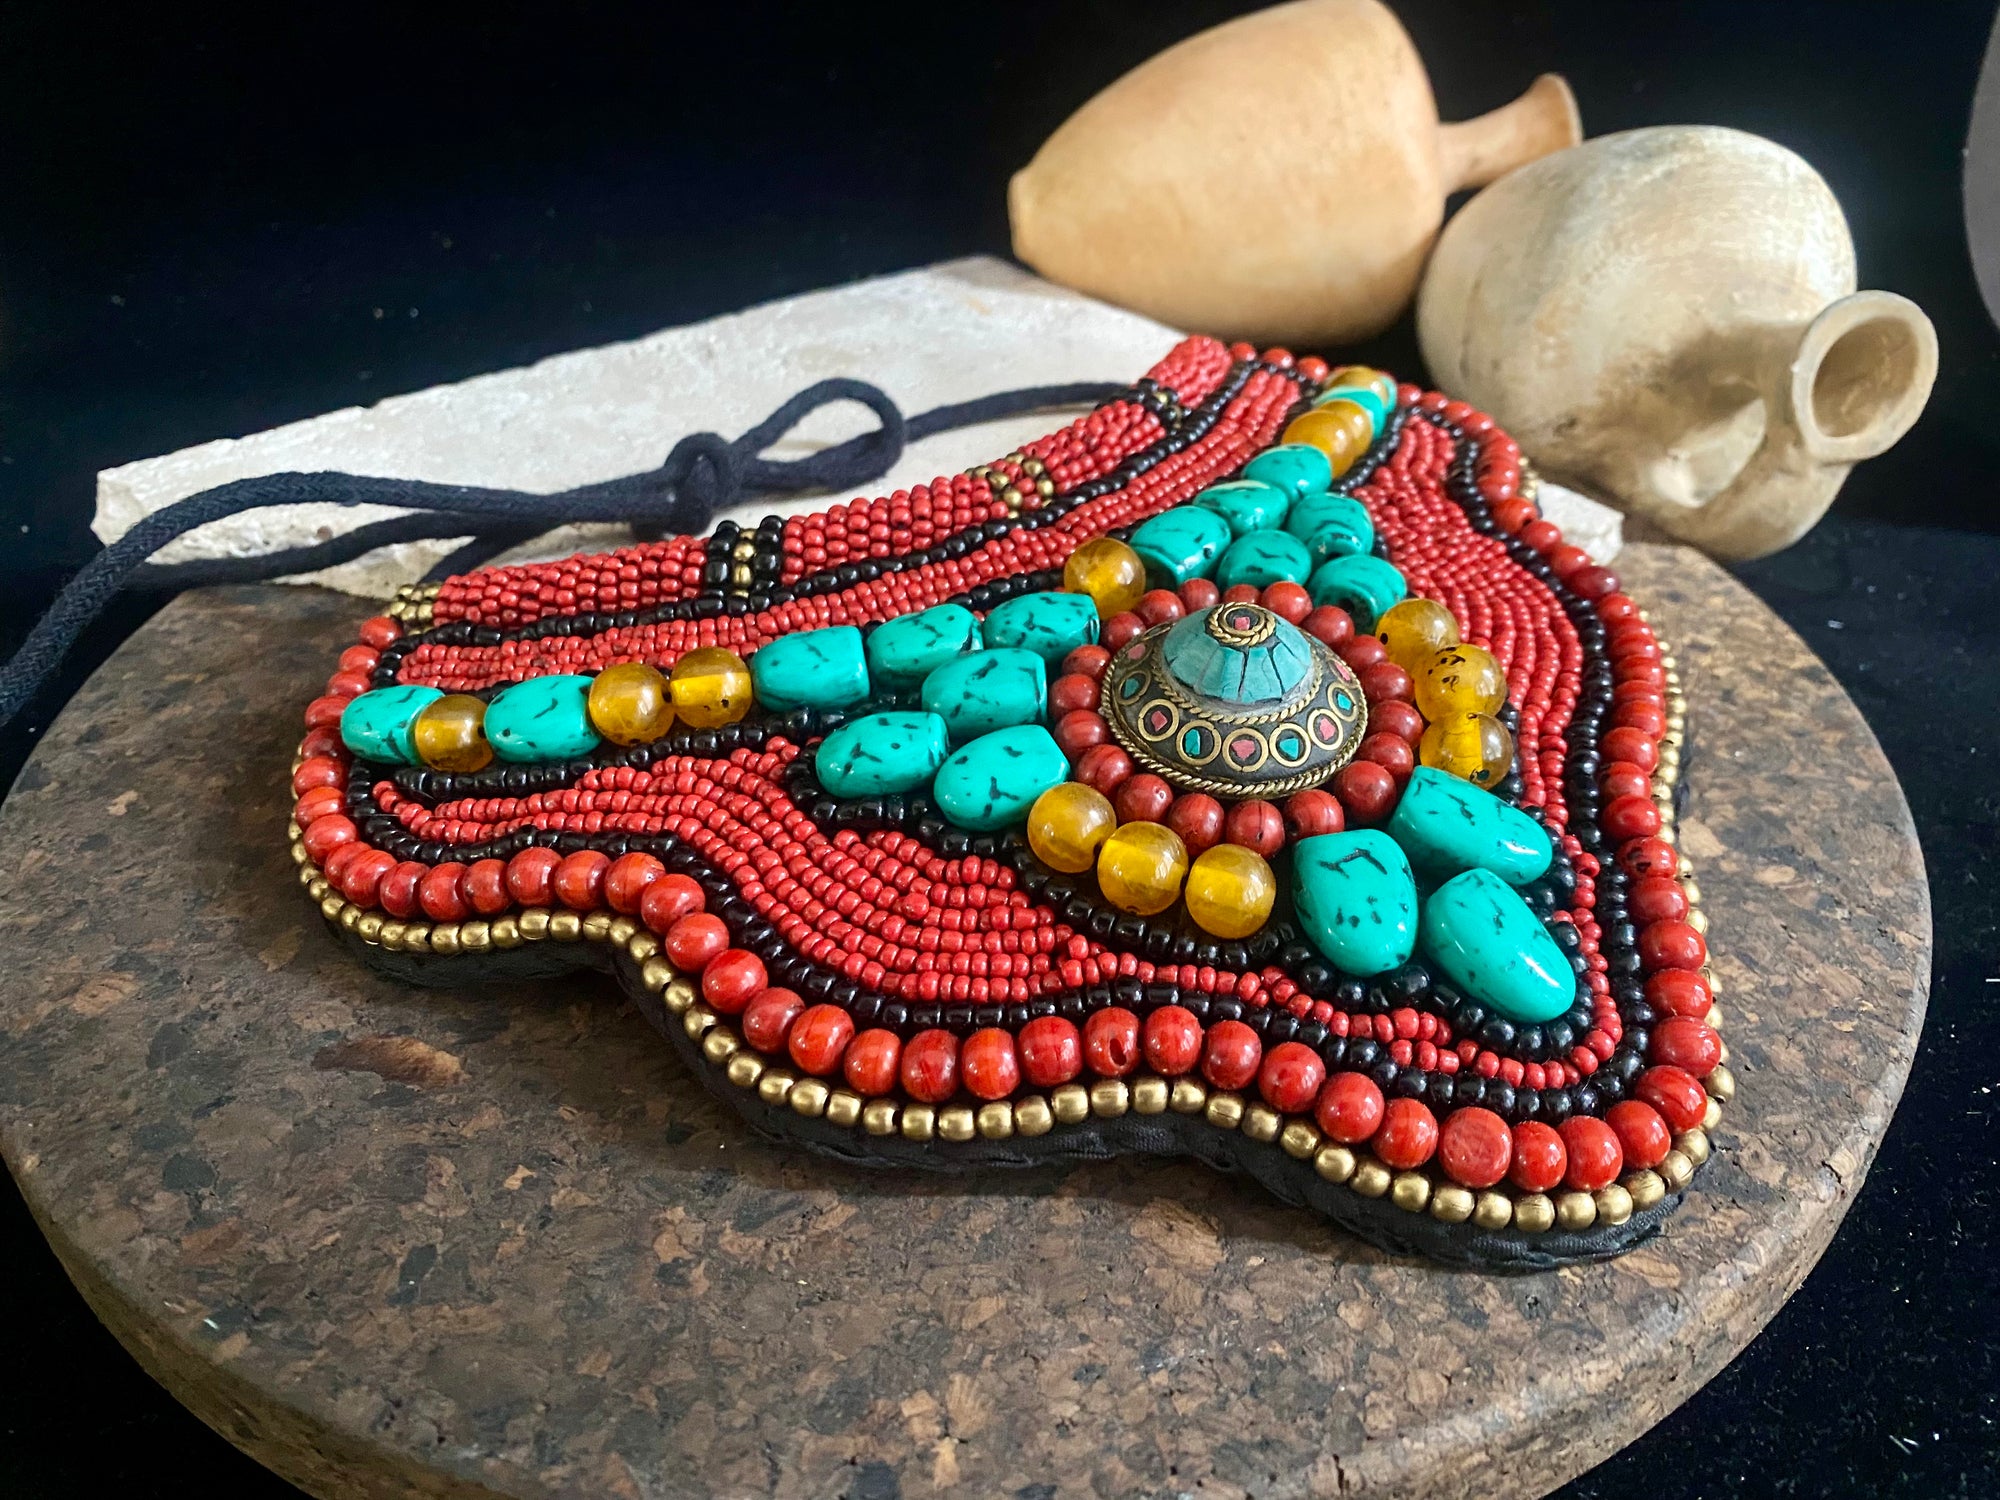 Traditional bib or pectoral beaded necklace, with a multitude of colourful ceramic and resin stones sewn onto a stiff fabric background and tied around the neck with a cord. Sikkim jewellery, India